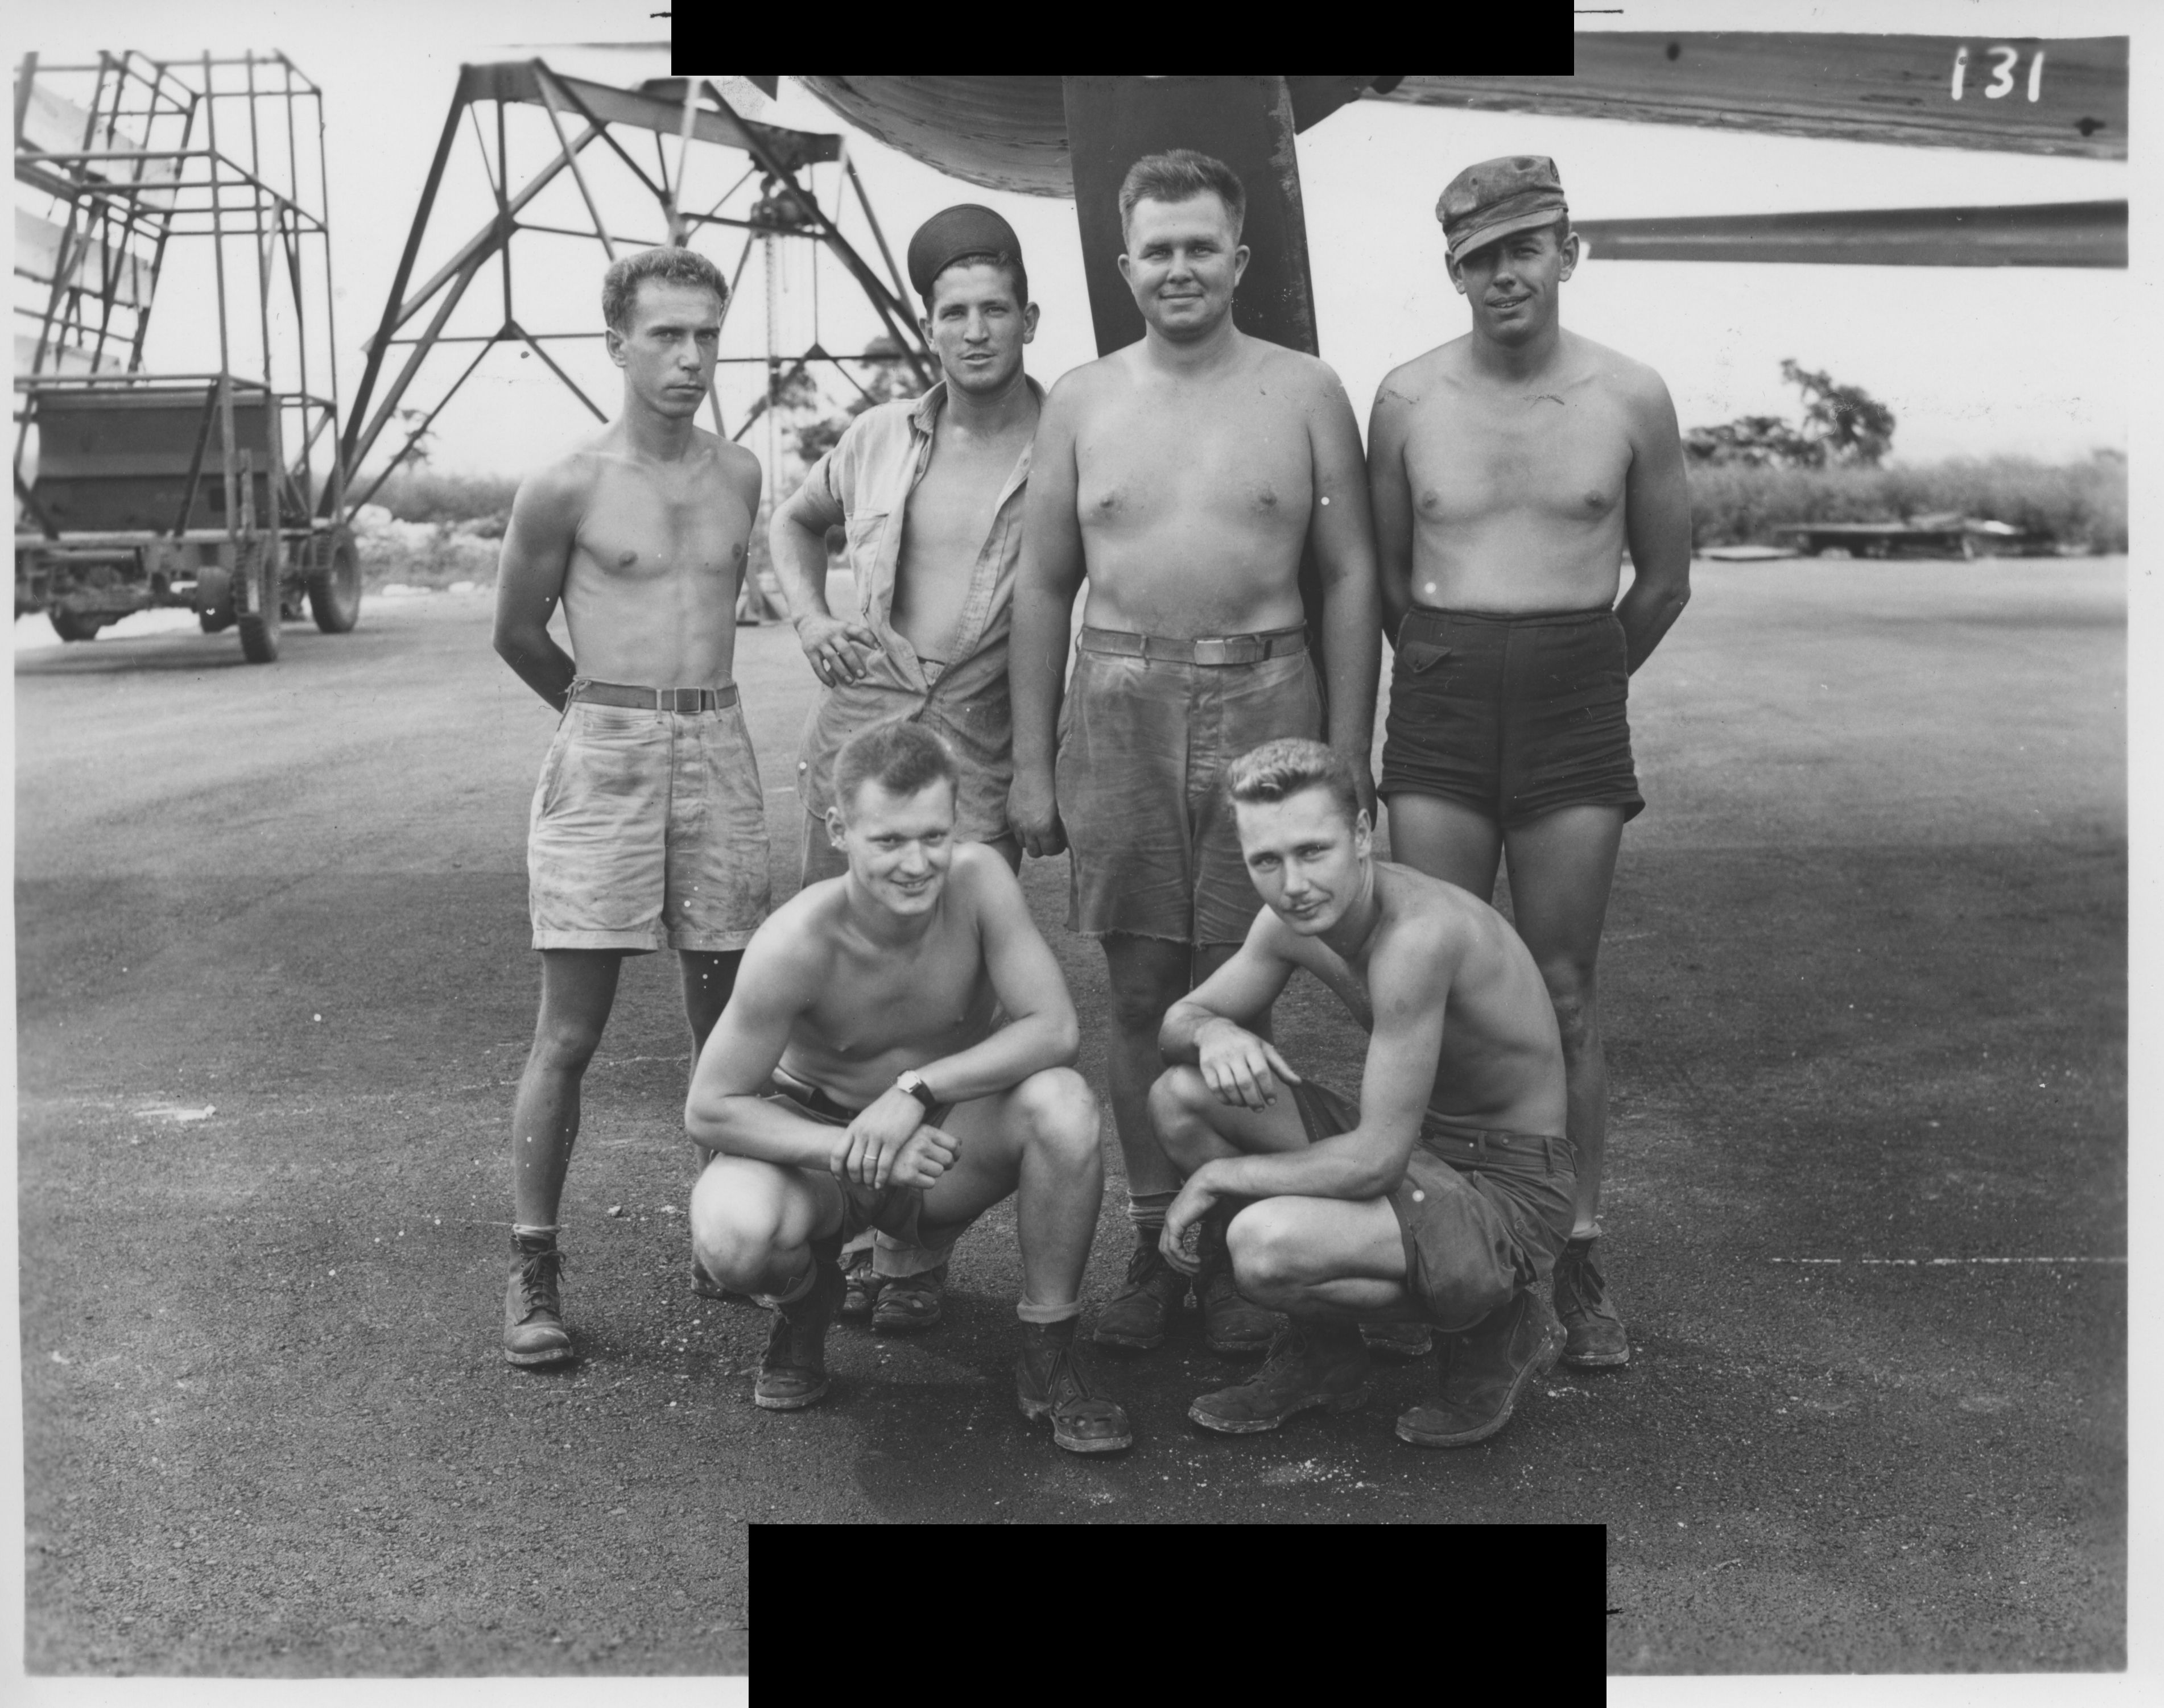 A group of five shirtless, light-skinned men pose outside against a background of heavy machinery. The men have close-cropped hair and most of them smile proudly. The photograph is black and white.